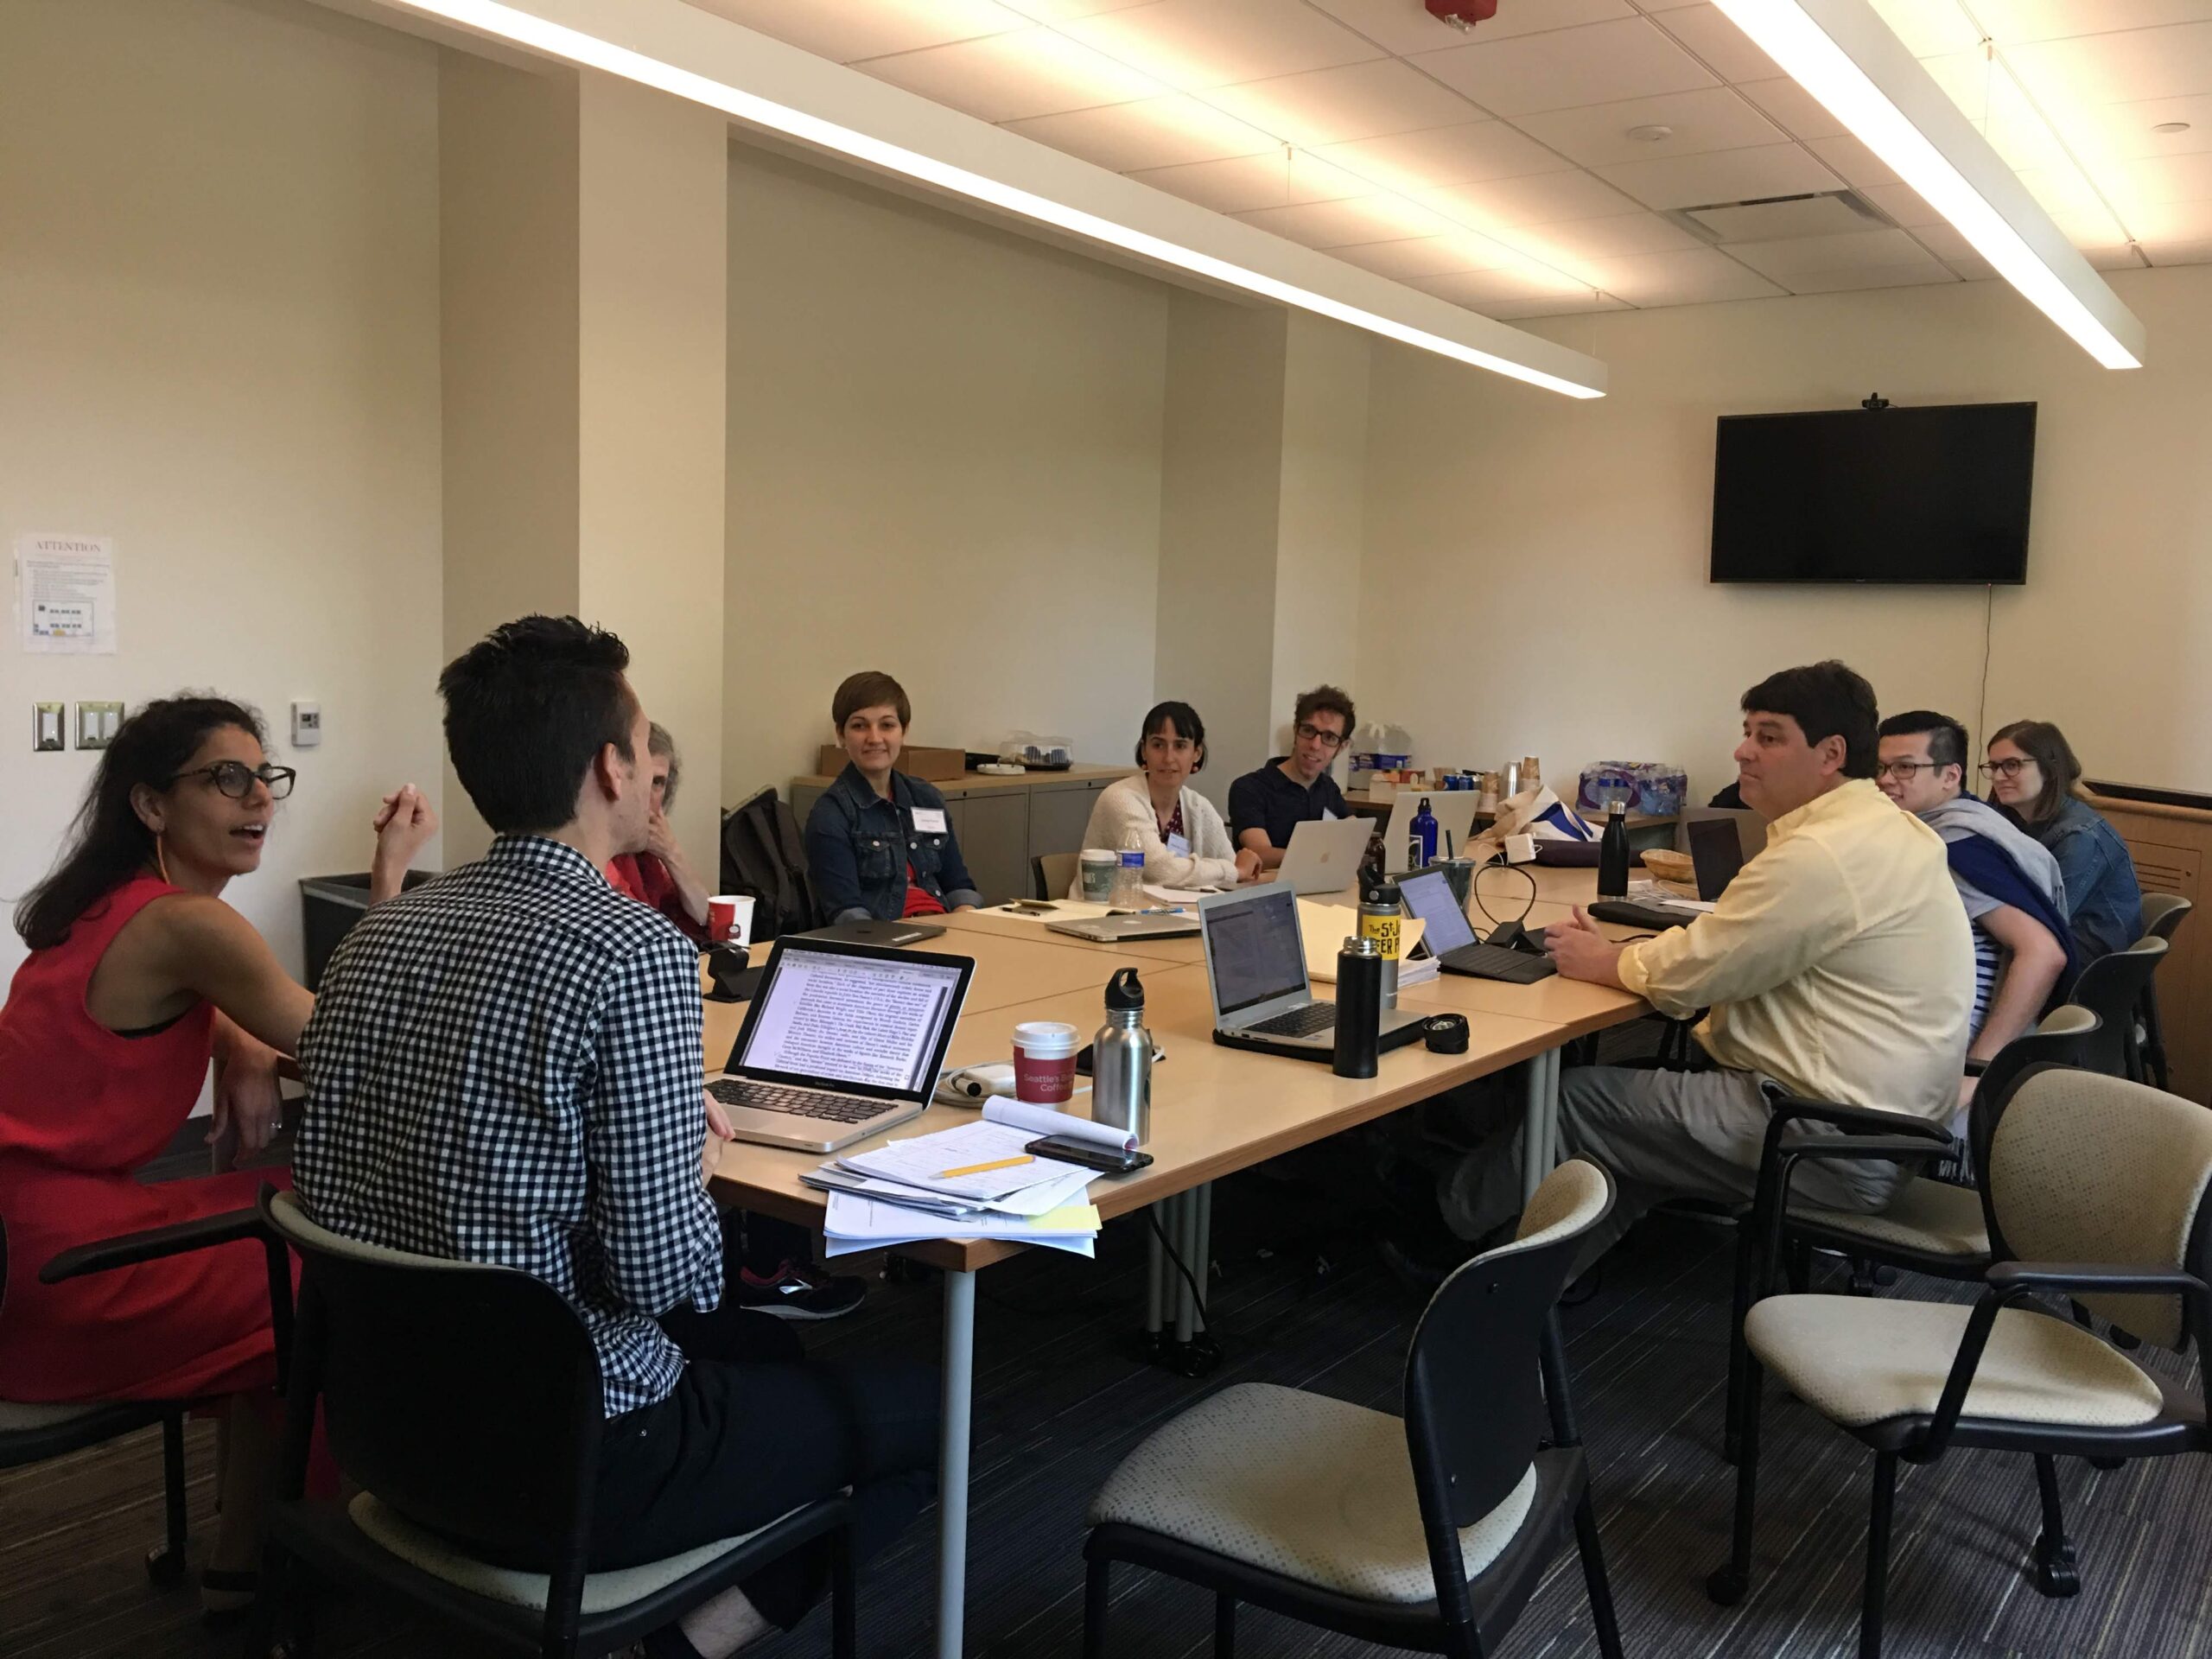 Cristina Pérez Jiménez and Alex Mazzaferro, at head of table, lead a discussion on how to write to and from multiple disciplines, while (L-R) Priscilla Wald, Christy Pottroff, Nissa Ren Cannon, Jesse Miller, Sean Goudie, Chris Eng, and Emily Hainze listen